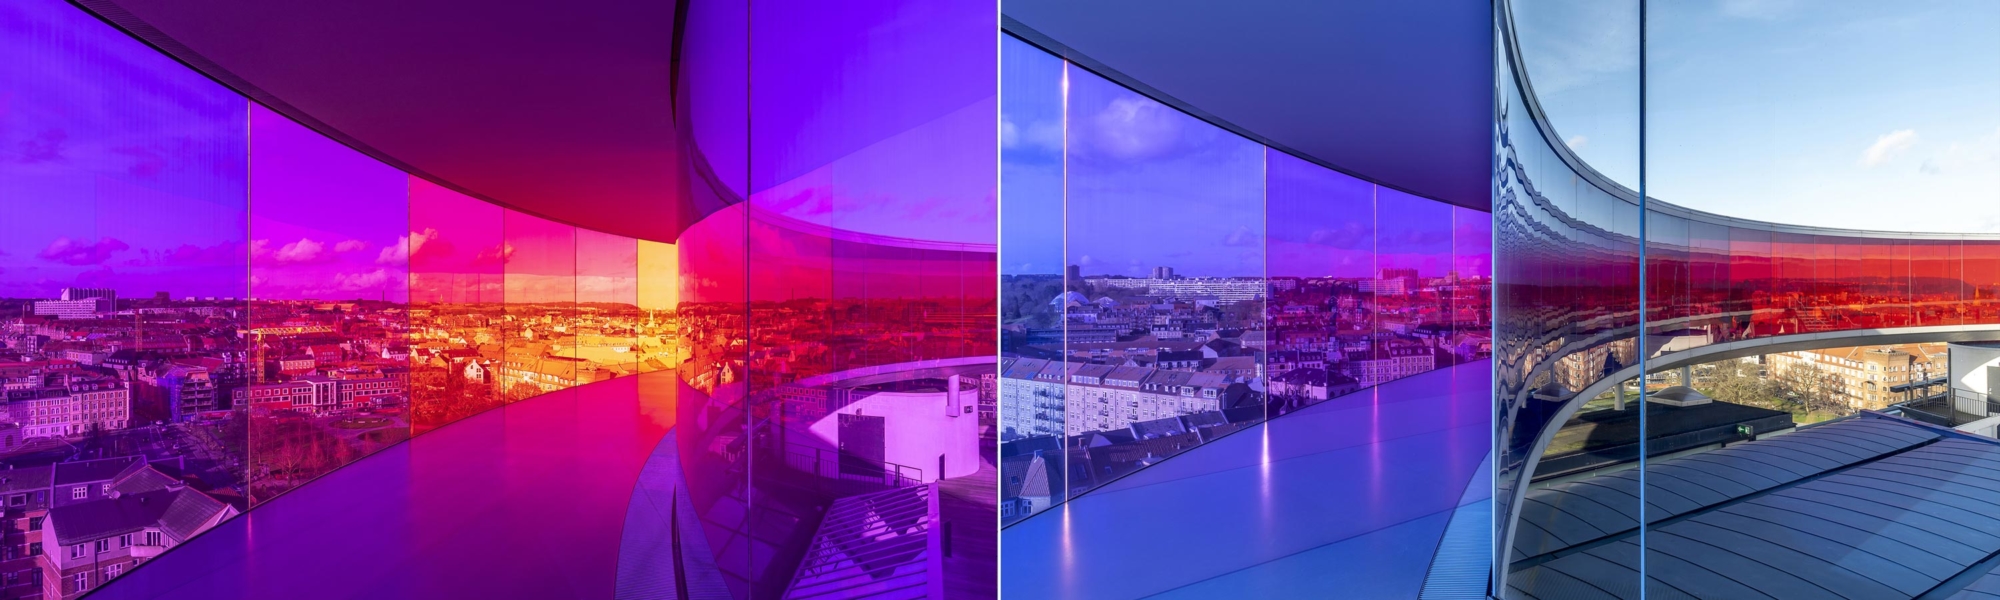 Your Rainbow Panorama by Olafur Eliasson photographed by Colin Walton at WaltonCreative